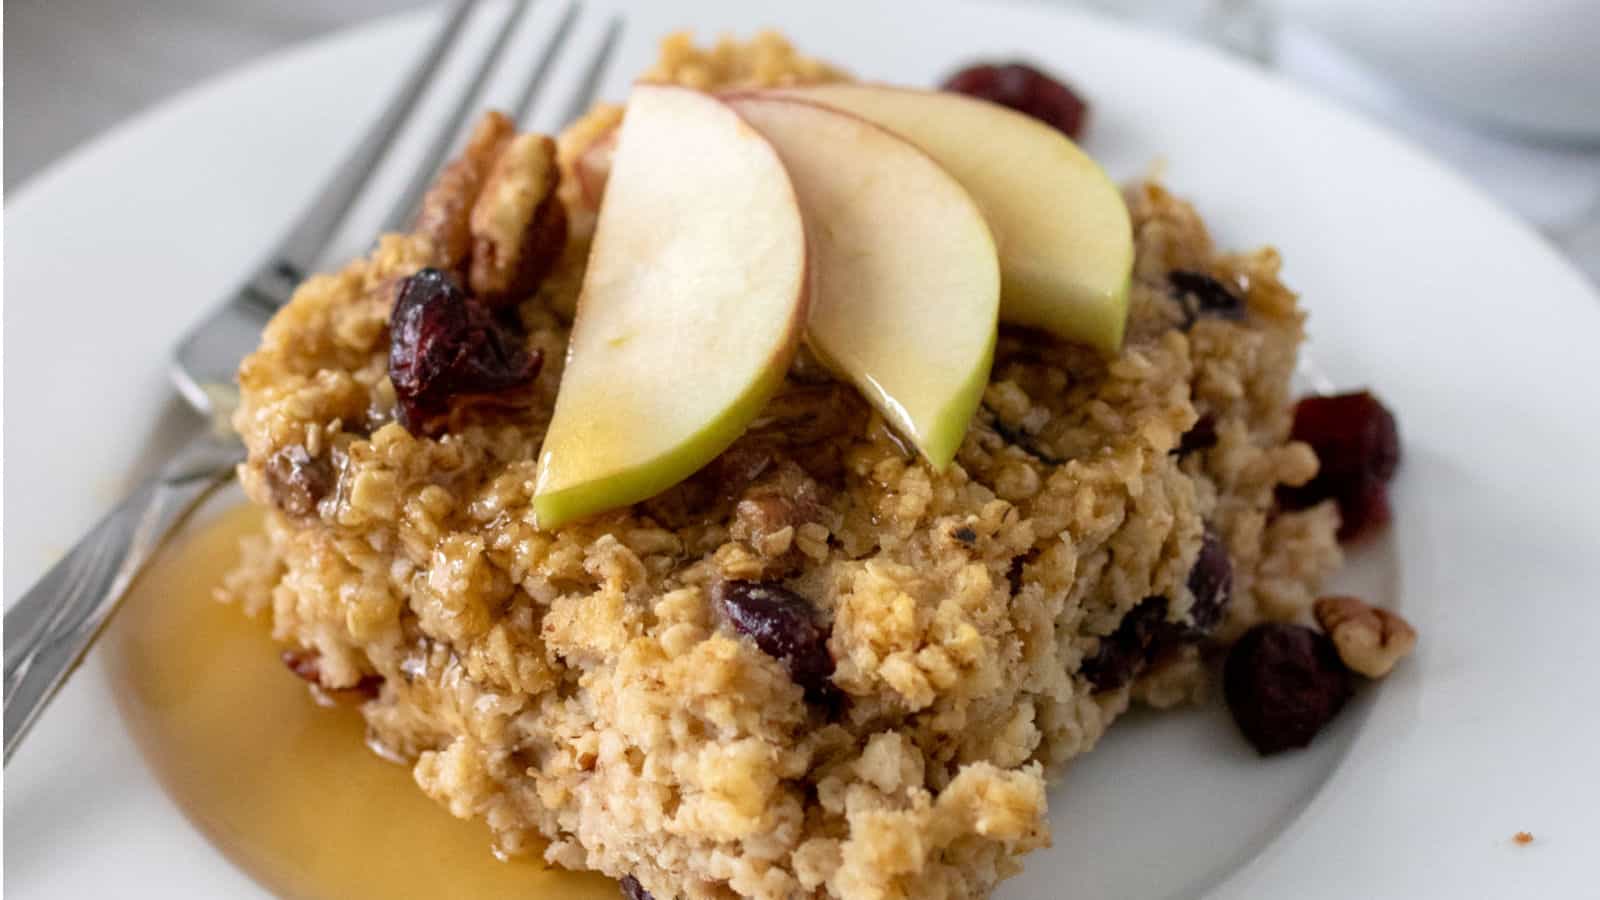 Baked oatmeal with sliced apples on top.